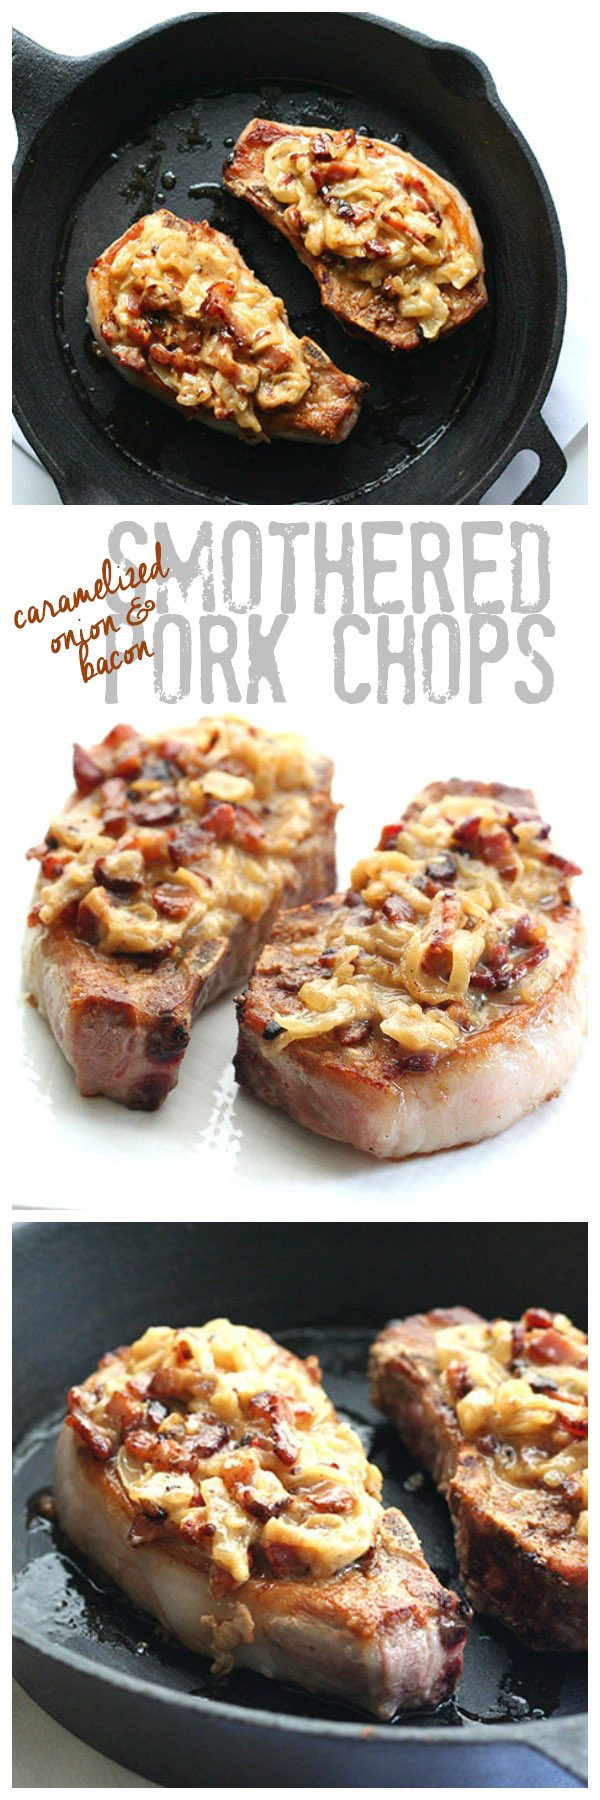 Low Carb Smothered Pork Chops
 Low Carb Primal Smothered Pork Chop Recipe